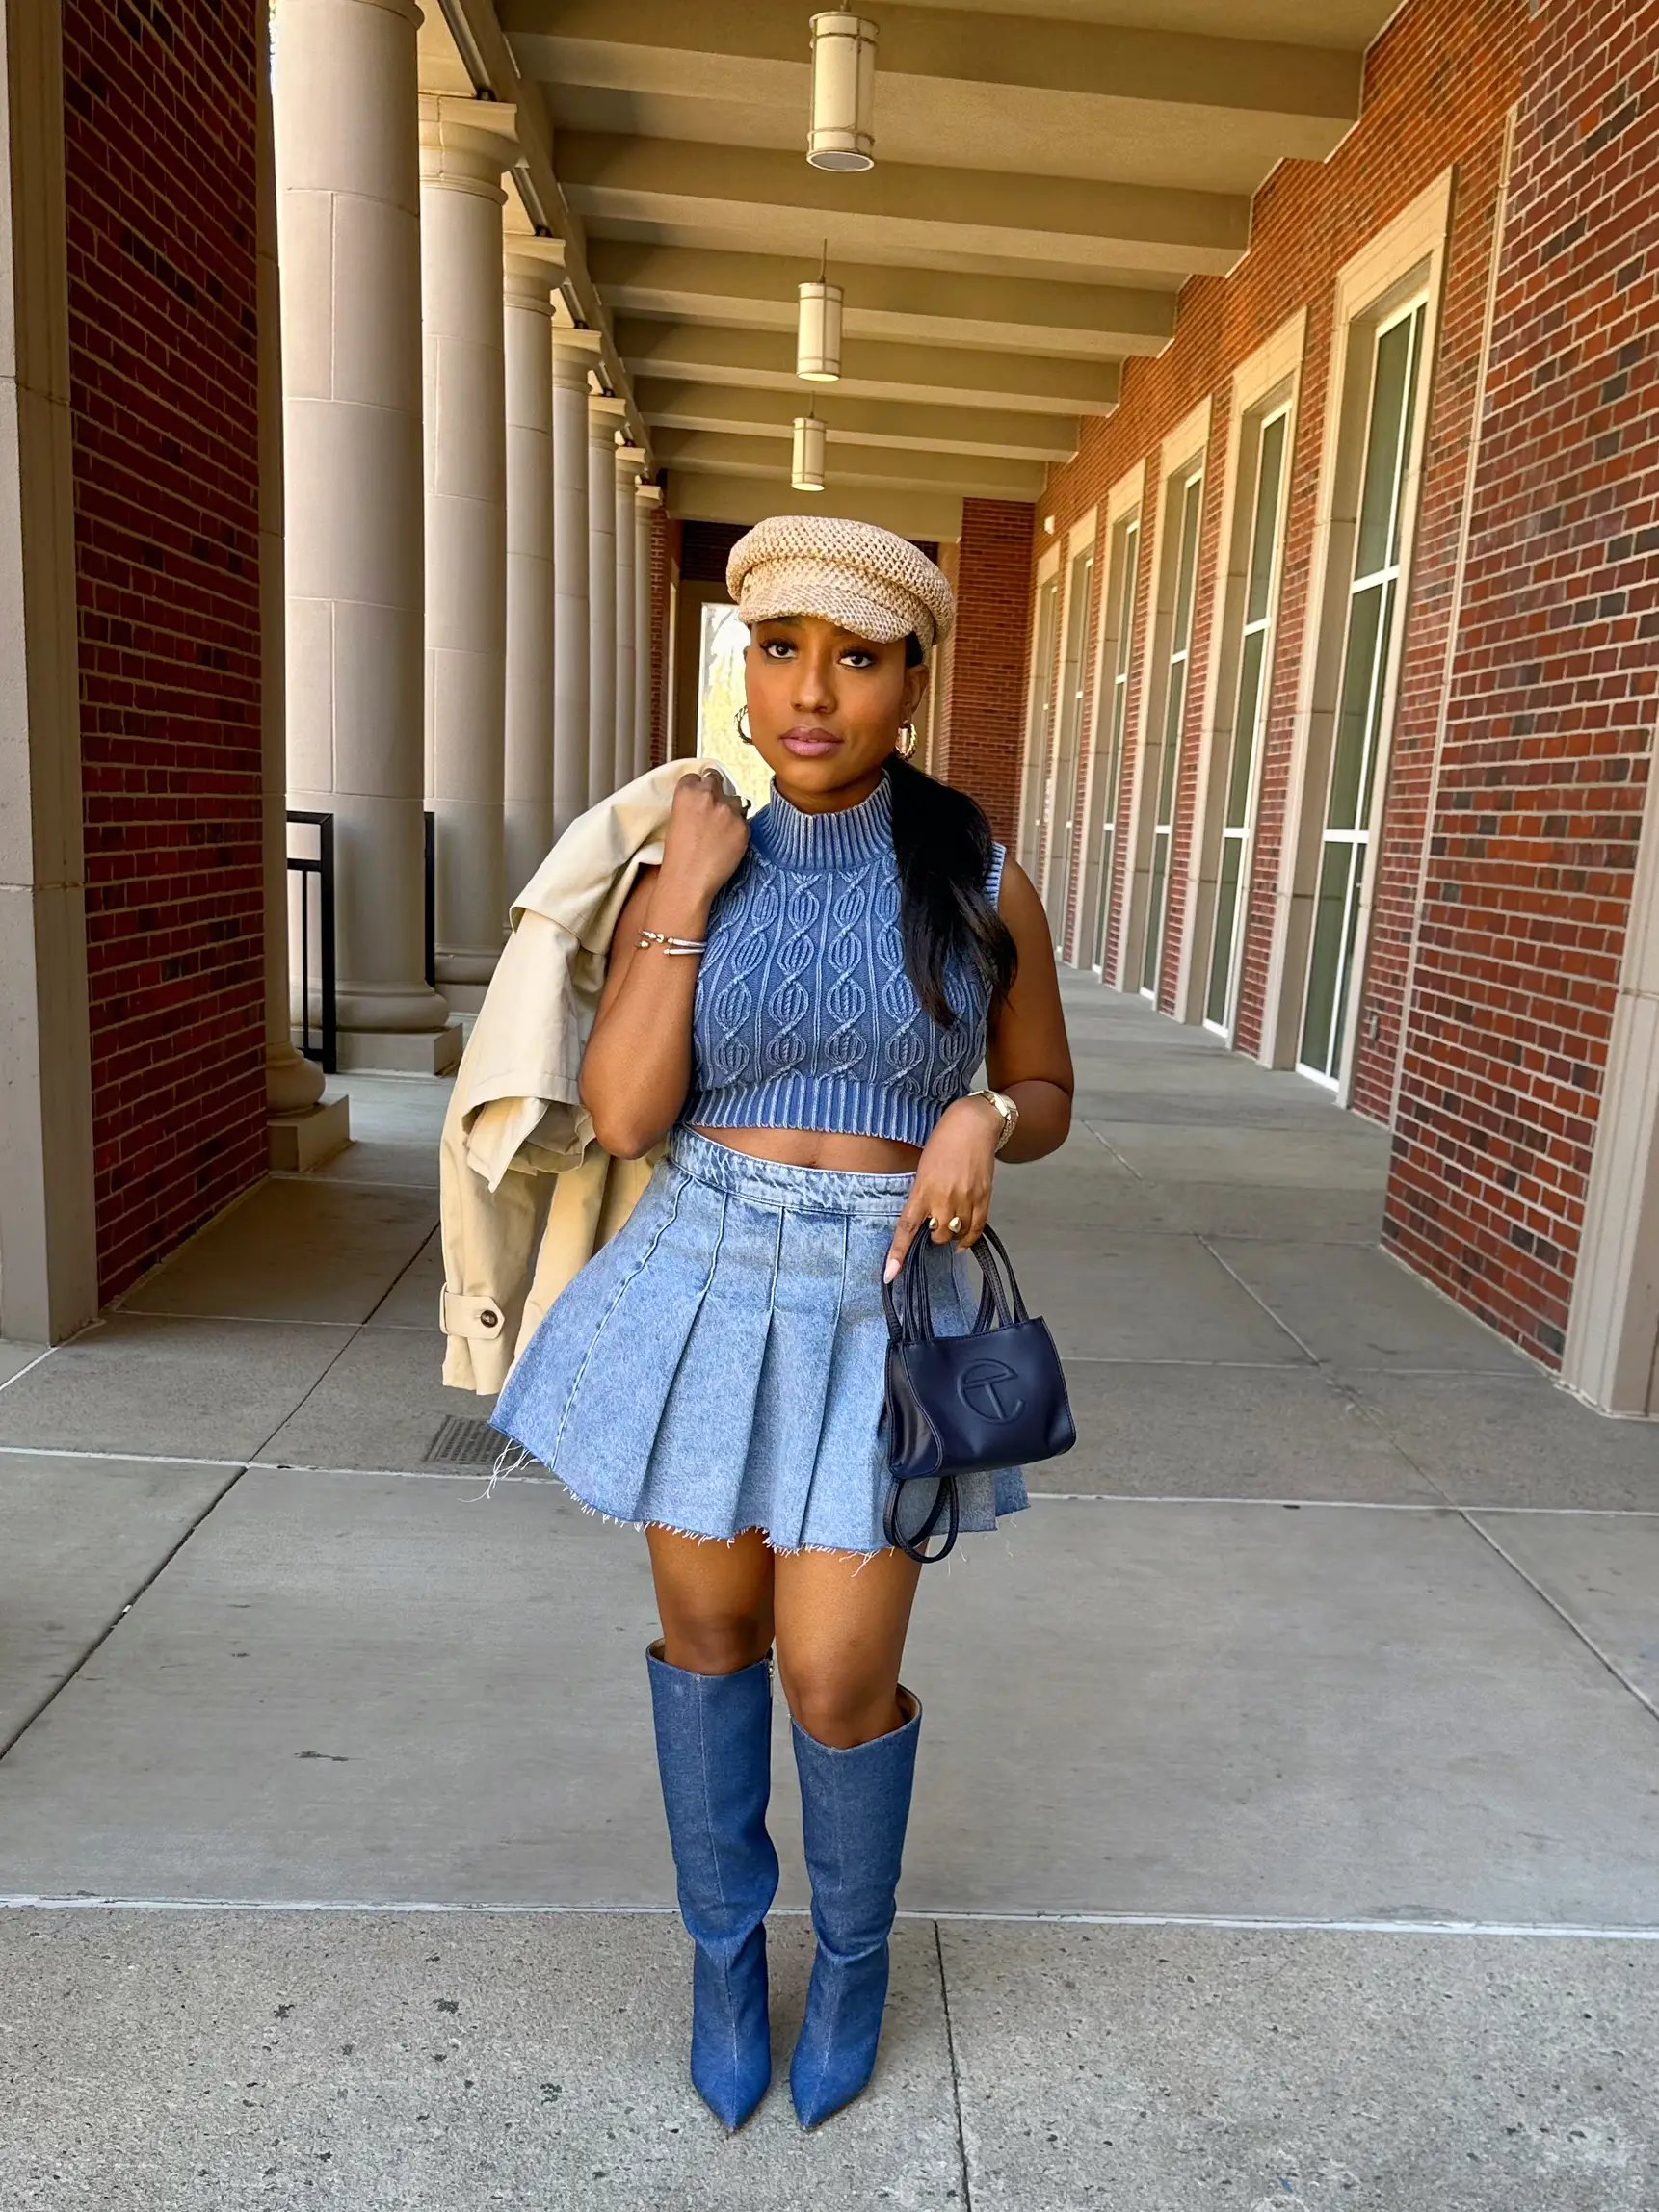 Denim Mini Skirt and Boot Style, Gallery posted by Jessica Bell